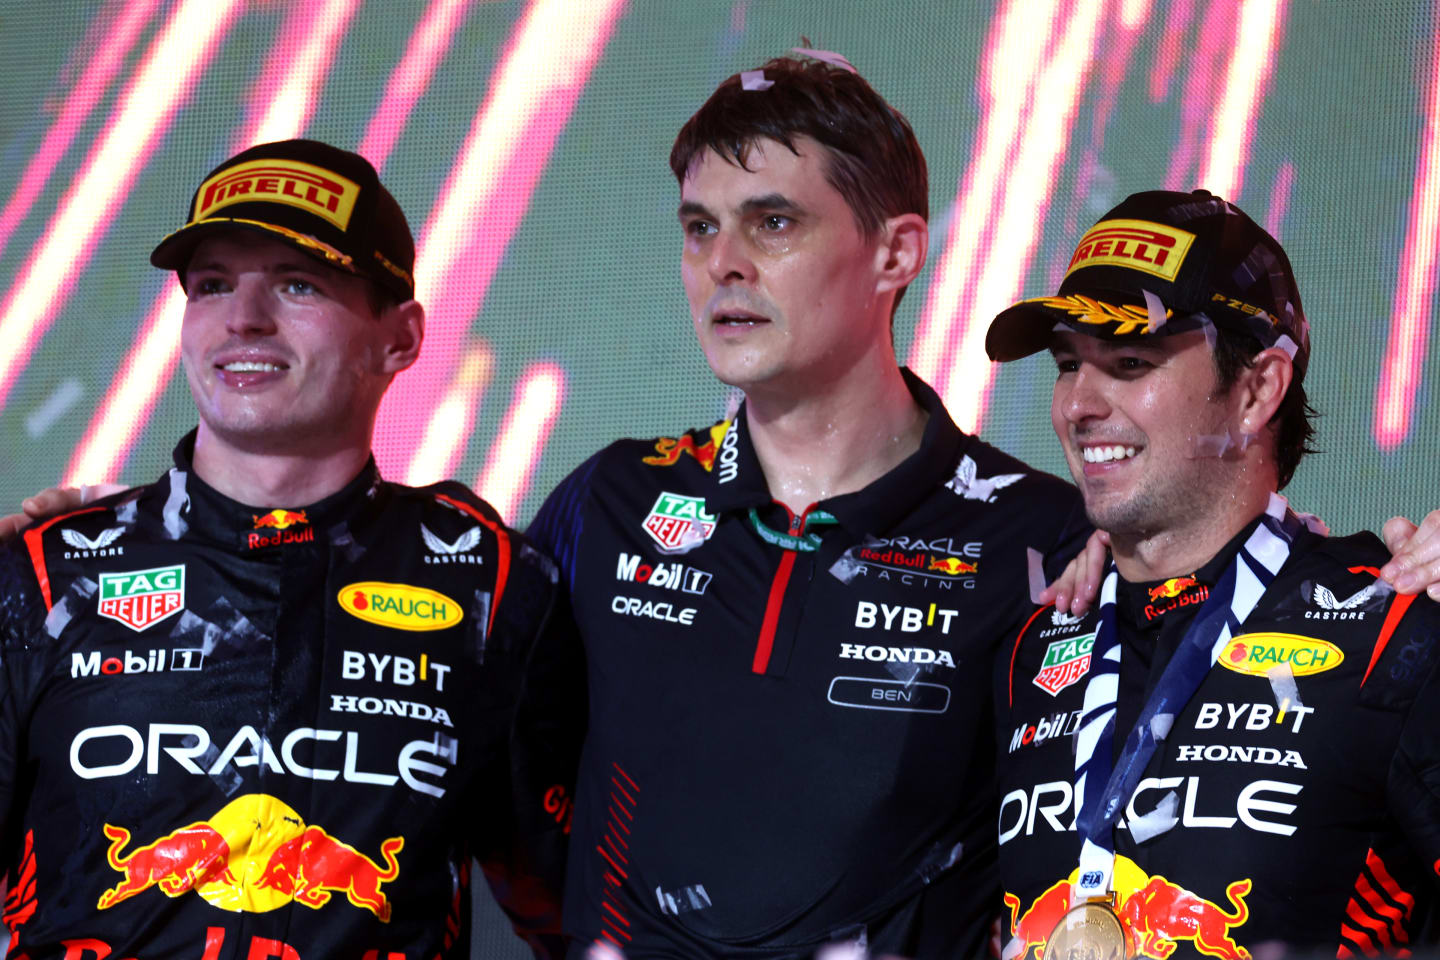 JEDDAH, SAUDI ARABIA - MARCH 19: Race winner Sergio Perez of Mexico and Oracle Red Bull Racing (R), Second placed Max Verstappen of the Netherlands and Oracle Red Bull Racing (L) and Ben Waterhouse, Head of Performance Engineering at Red Bull Racing, celebrate on the podium during the F1 Grand Prix of Saudi Arabia at Jeddah Corniche Circuit on March 19, 2023 in Jeddah, Saudi Arabia. (Photo by Lars Baron/Getty Images)